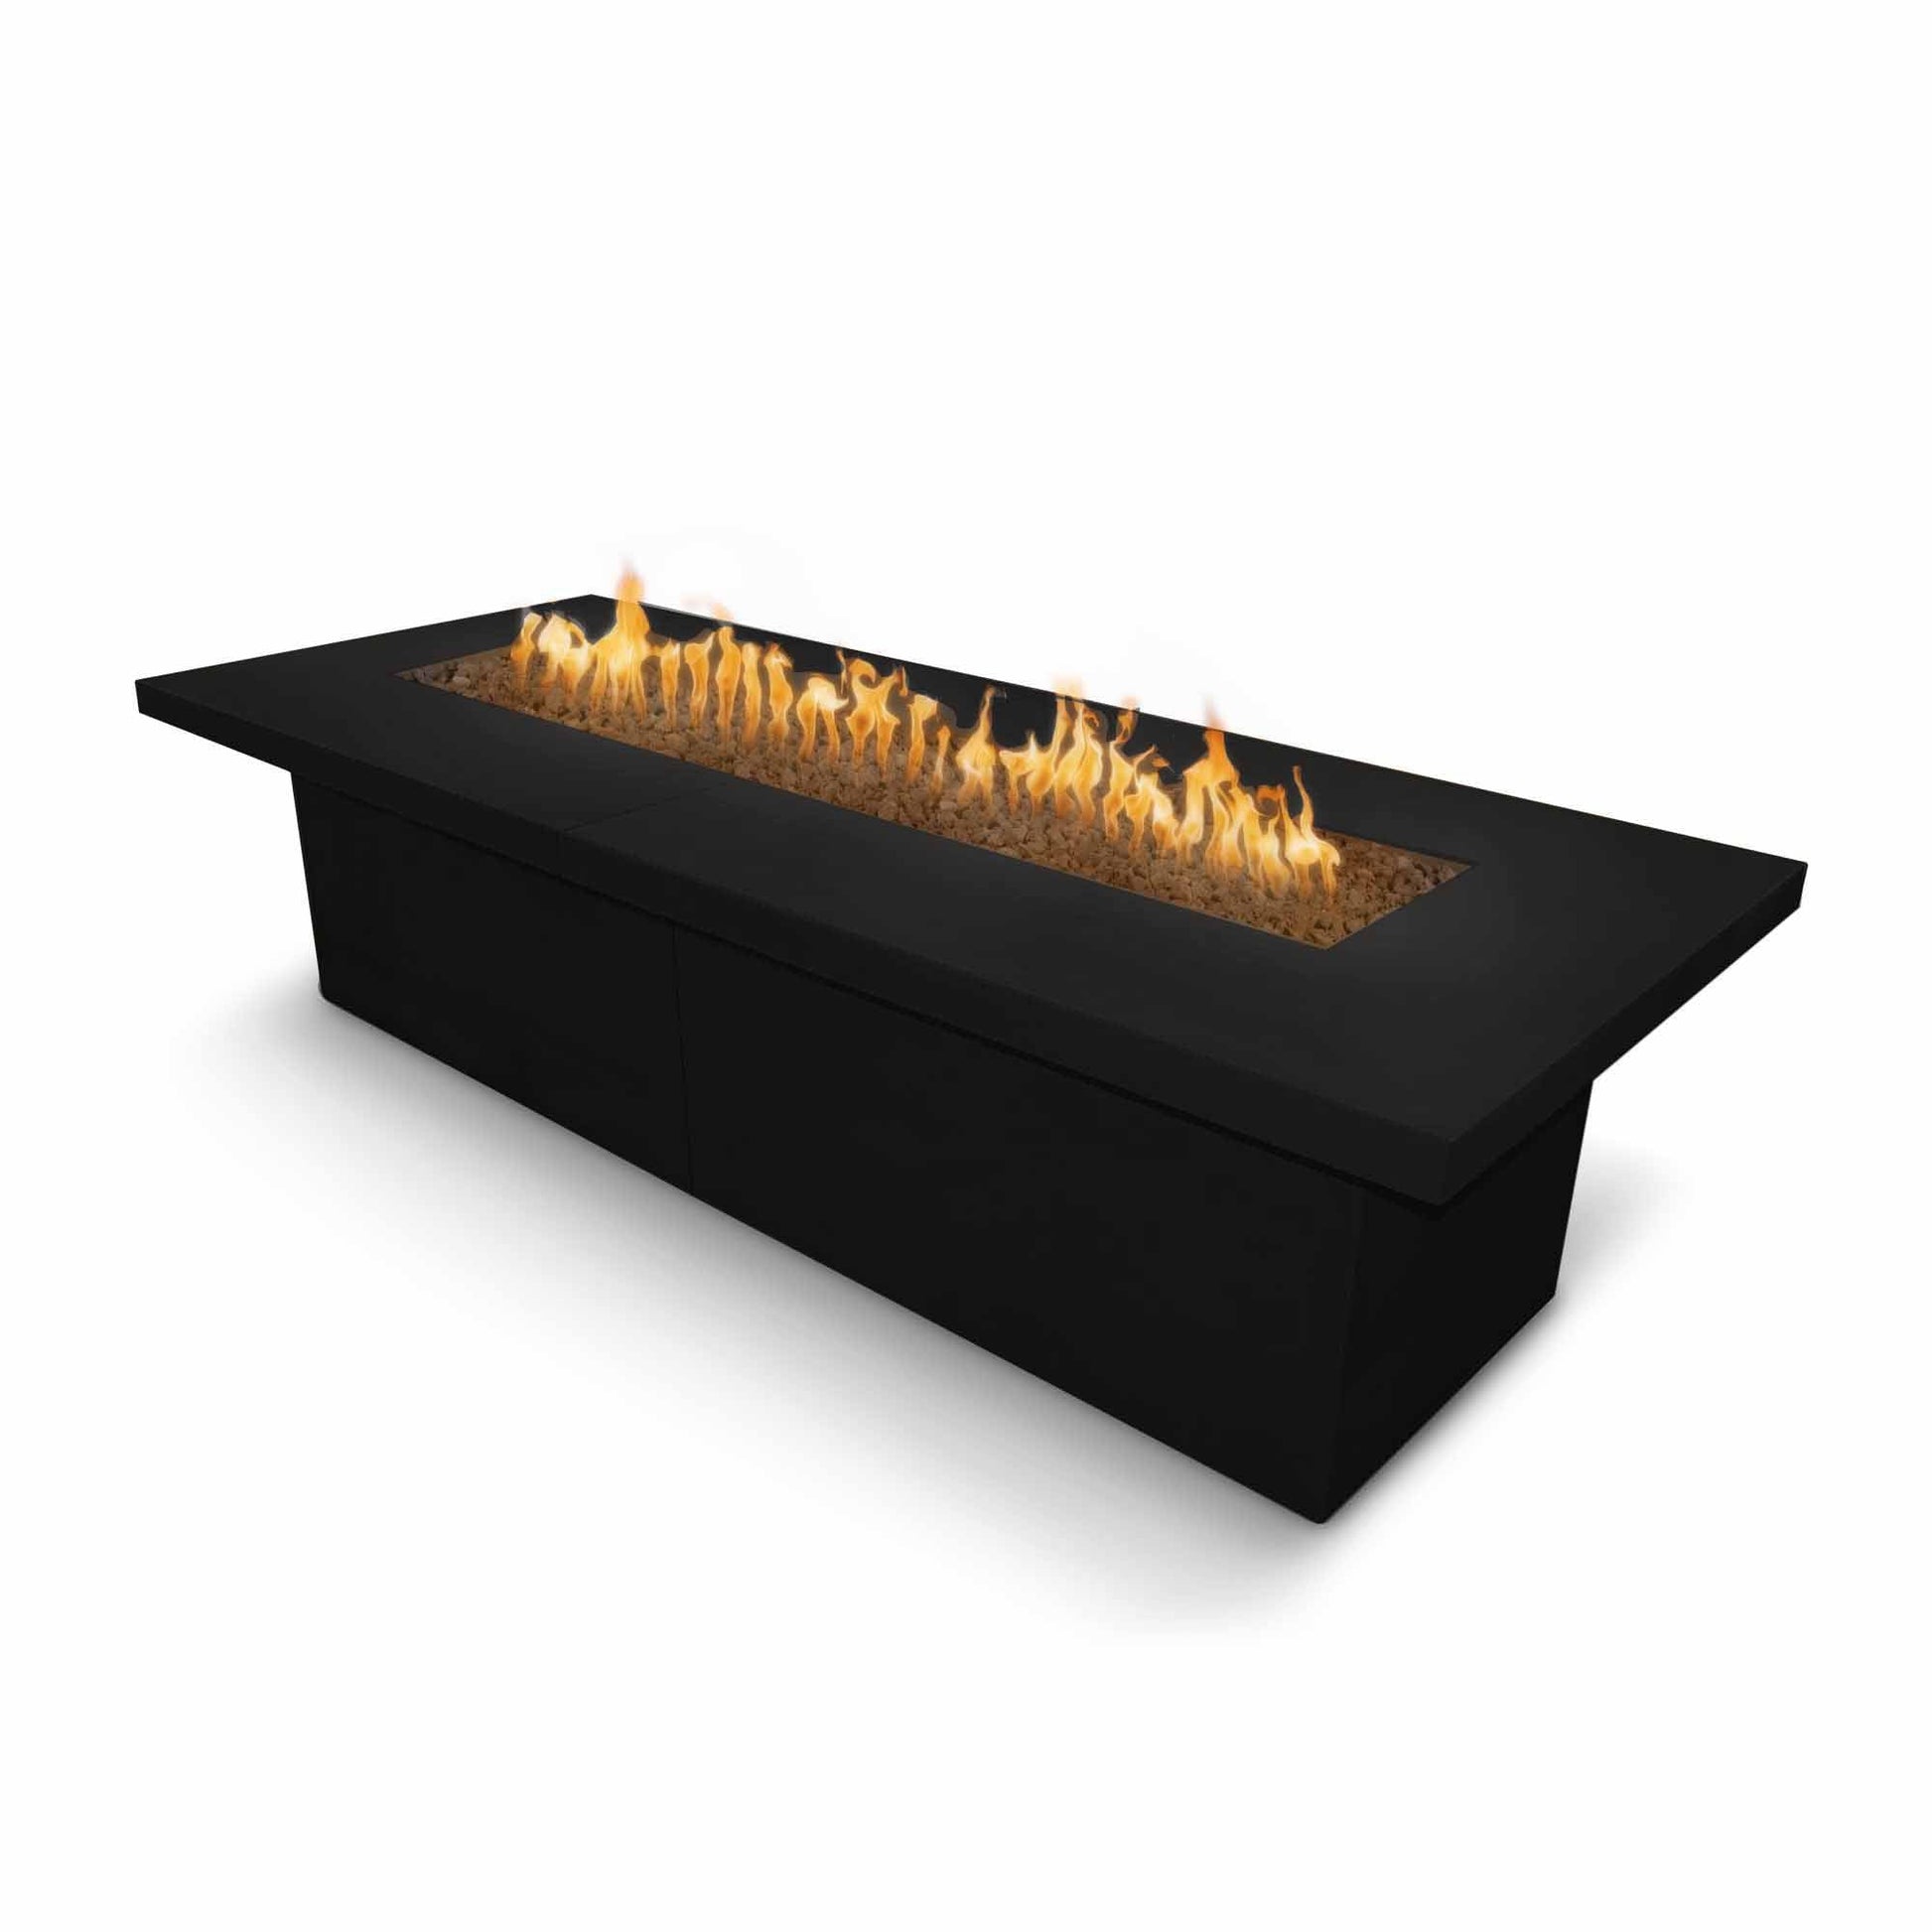 The Outdoor Plus Rectangular Newport 144" Black Powder Coated Metal Liquid Propane Fire Pit with 110V Electronic Ignition